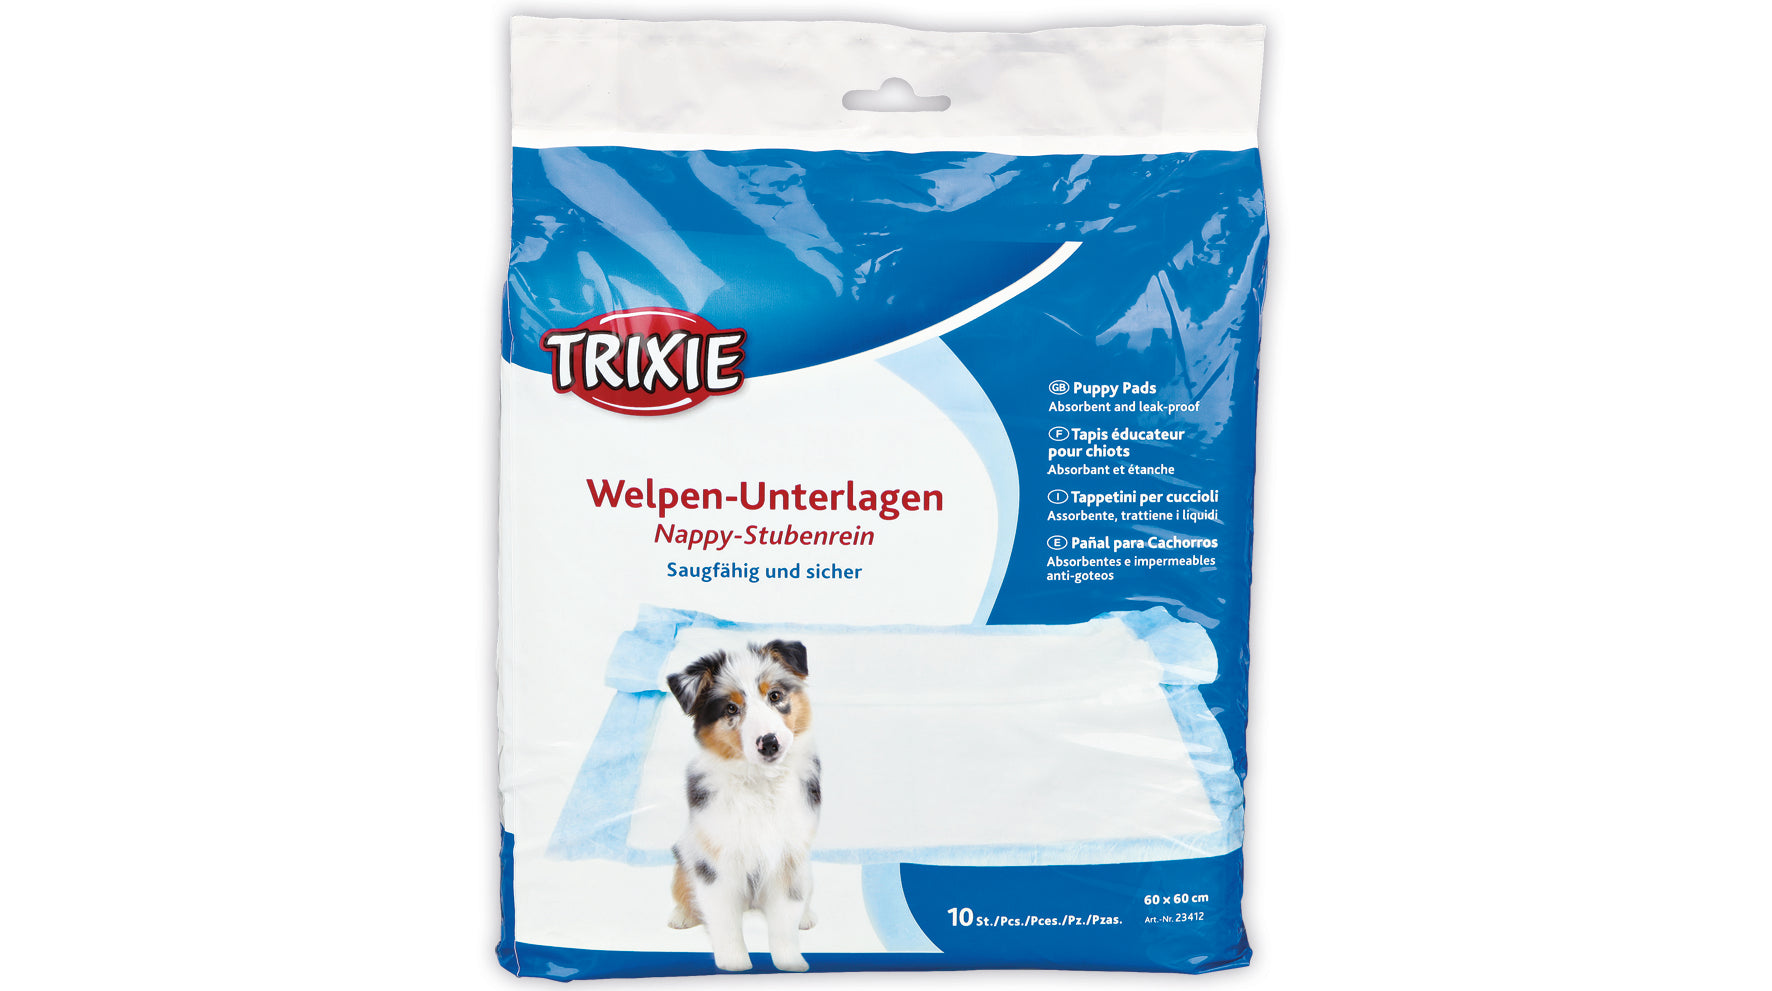 Trixie Germany Nappy Puppy Pad 10 Pads Pack, (60 x 60 cm) 24 x 24 inch - Petsgool Online